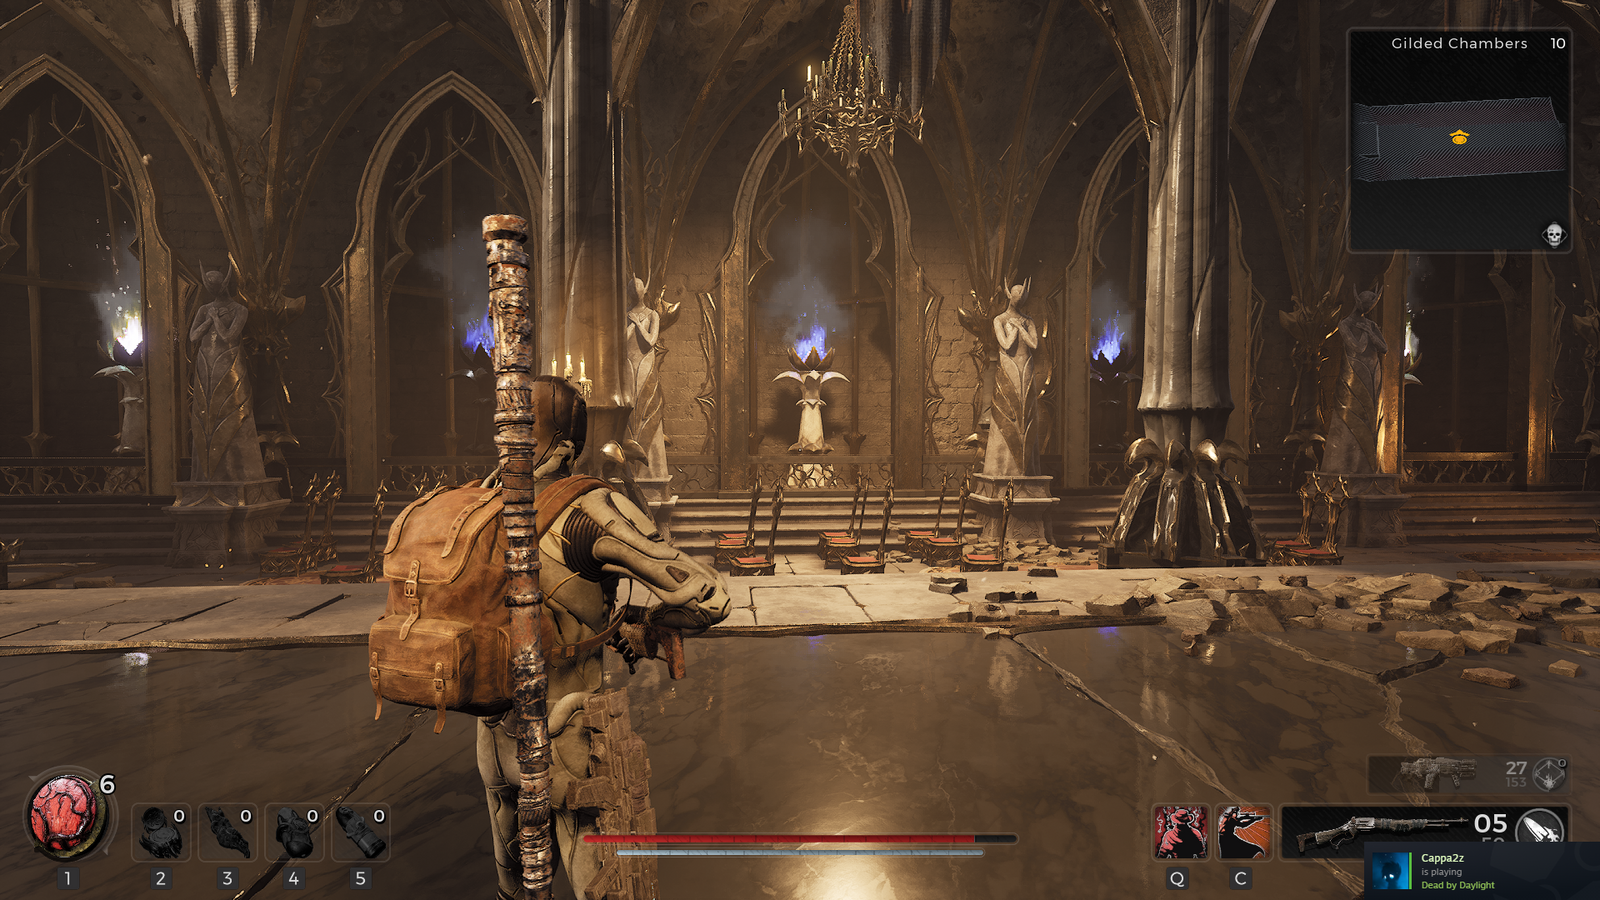 Remnant 2 Gilded Chambers torch puzzle